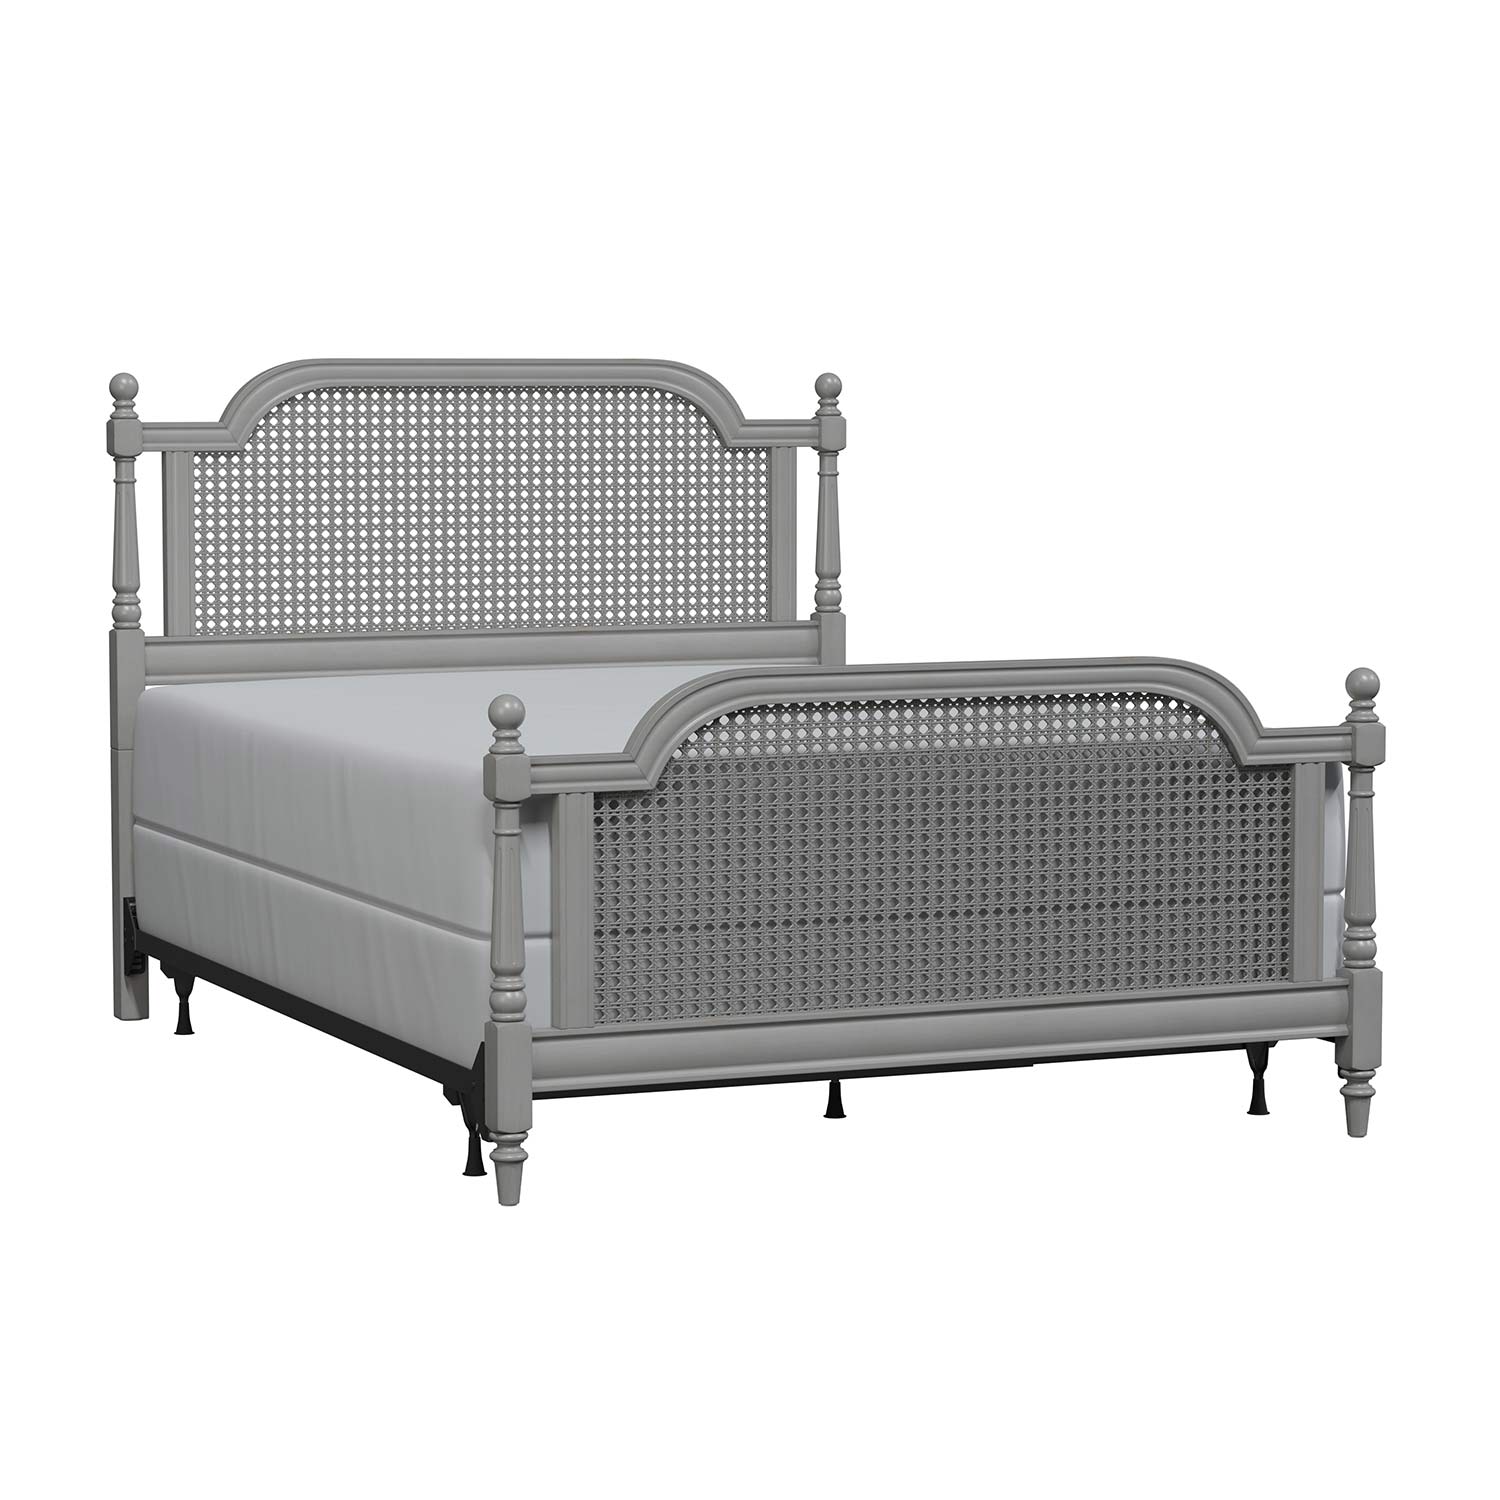 Hillsdale Melanie Wood and Cane Bed - French Gray